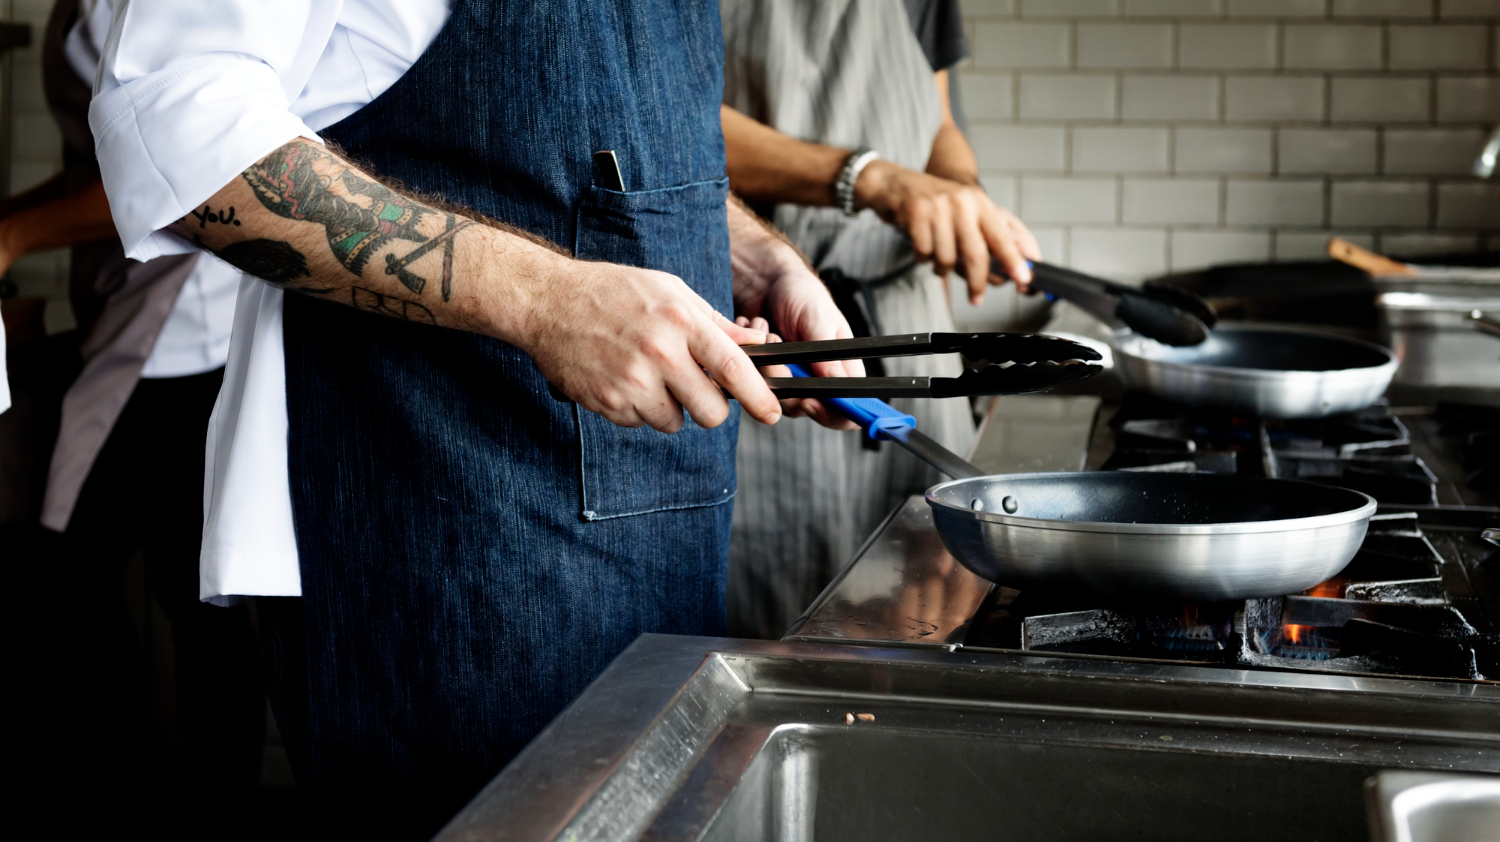 A restaurant chef stands at a stovetop, holding a sauce pan over open flame and tongs. He's wearing a dark demin blue apron and white shirt. Forearm tattoos are visible from under his chef's jacket sleeve.